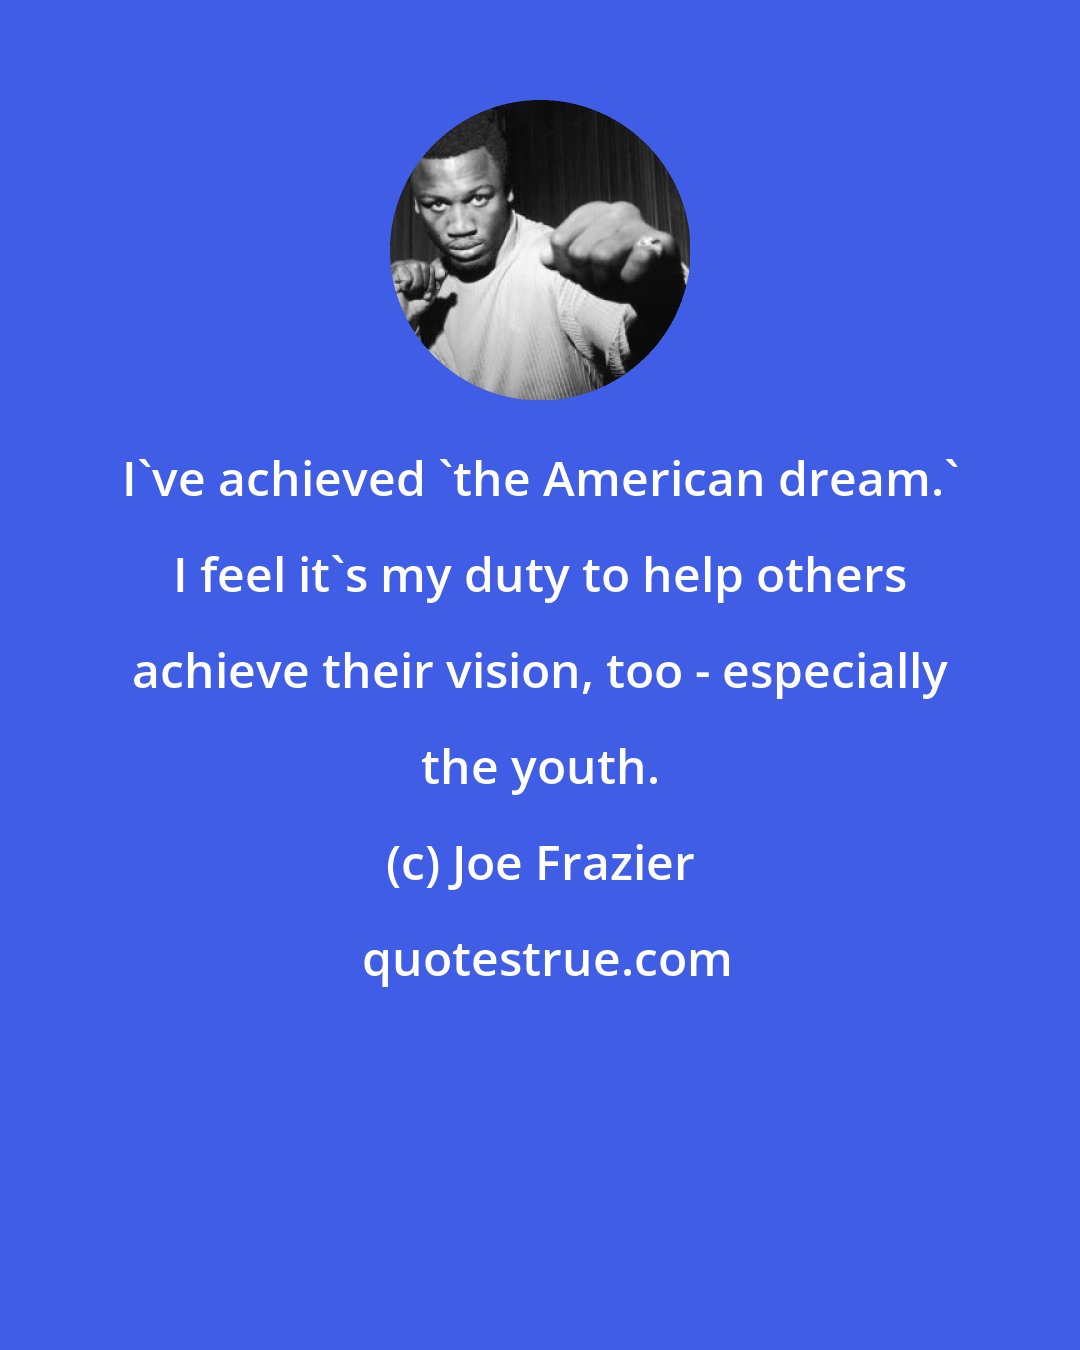 Joe Frazier: I've achieved 'the American dream.' I feel it's my duty to help others achieve their vision, too - especially the youth.